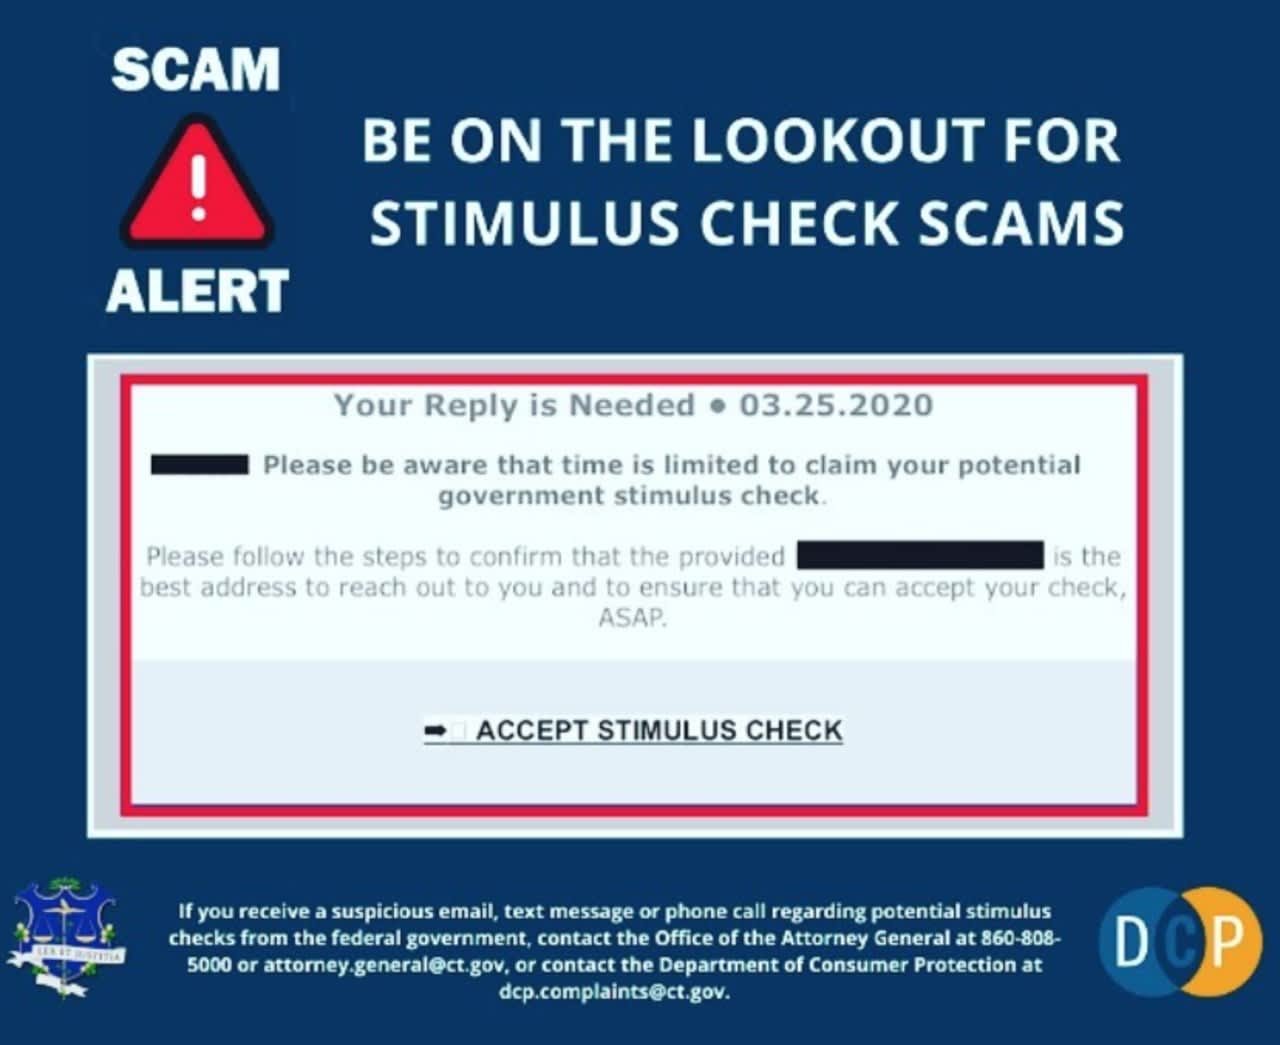 Connecticut Attorney General William Tong and the Connecticut State Department of Consumer Protection is warning residents to be aware of potential scammers during the COVID-19 outbreak.